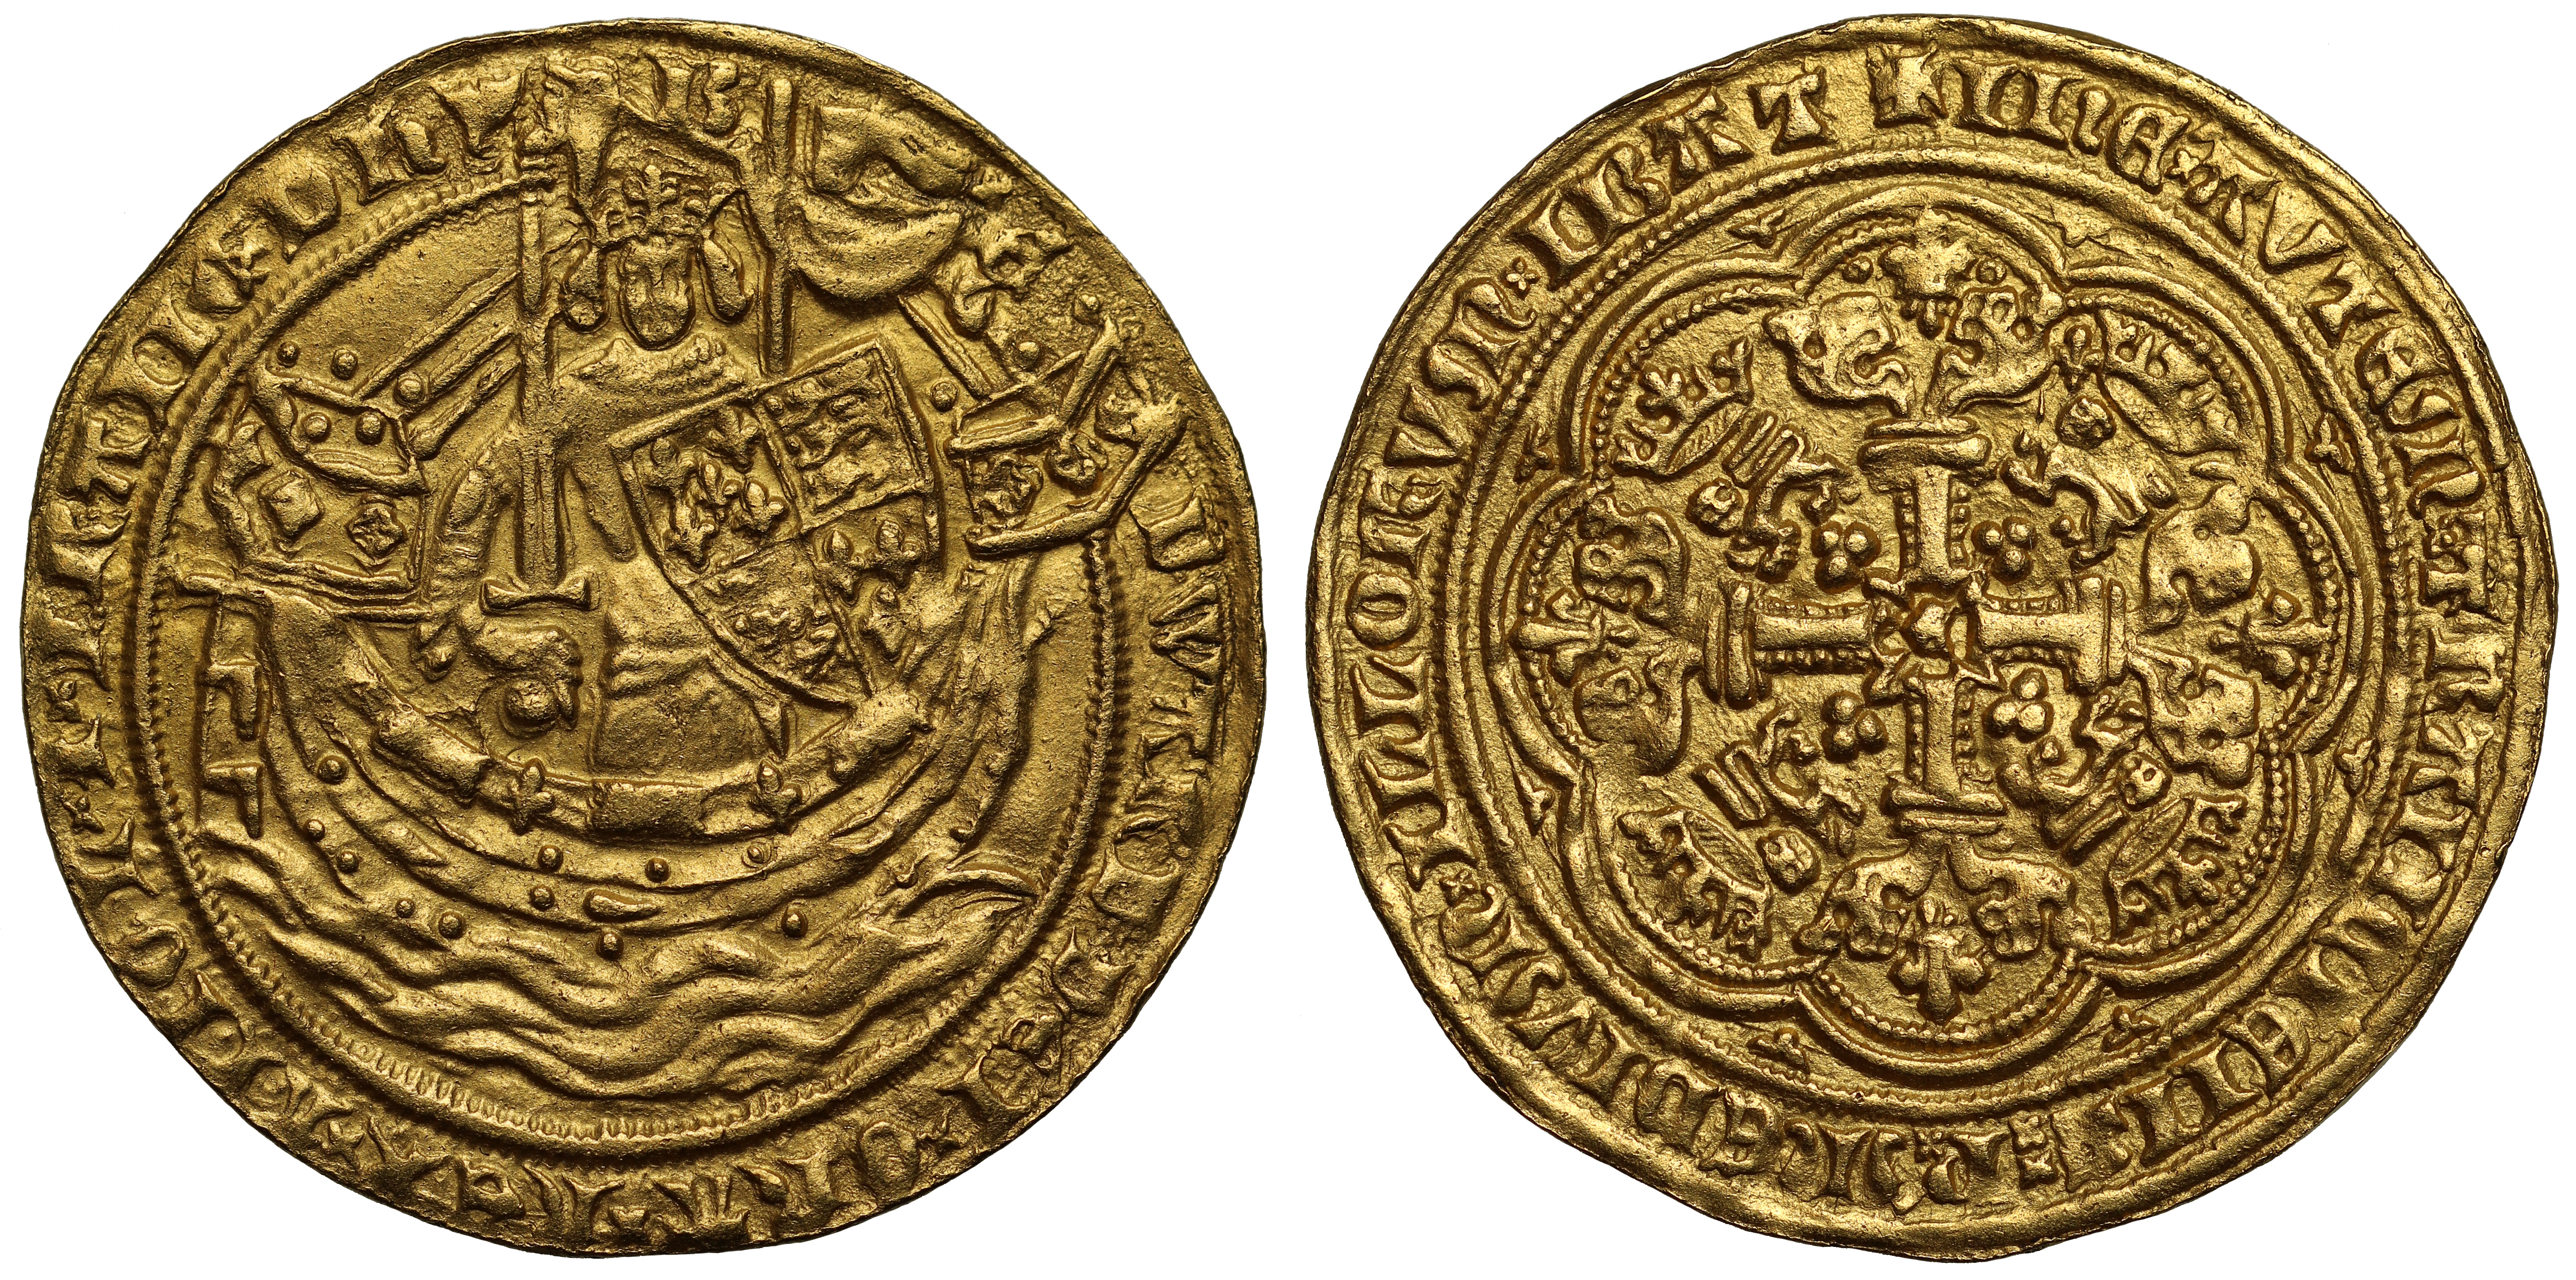 Edward III (1327-77), gold Noble, Pre-Treaty series G (1356-61), King standing in ship sailing